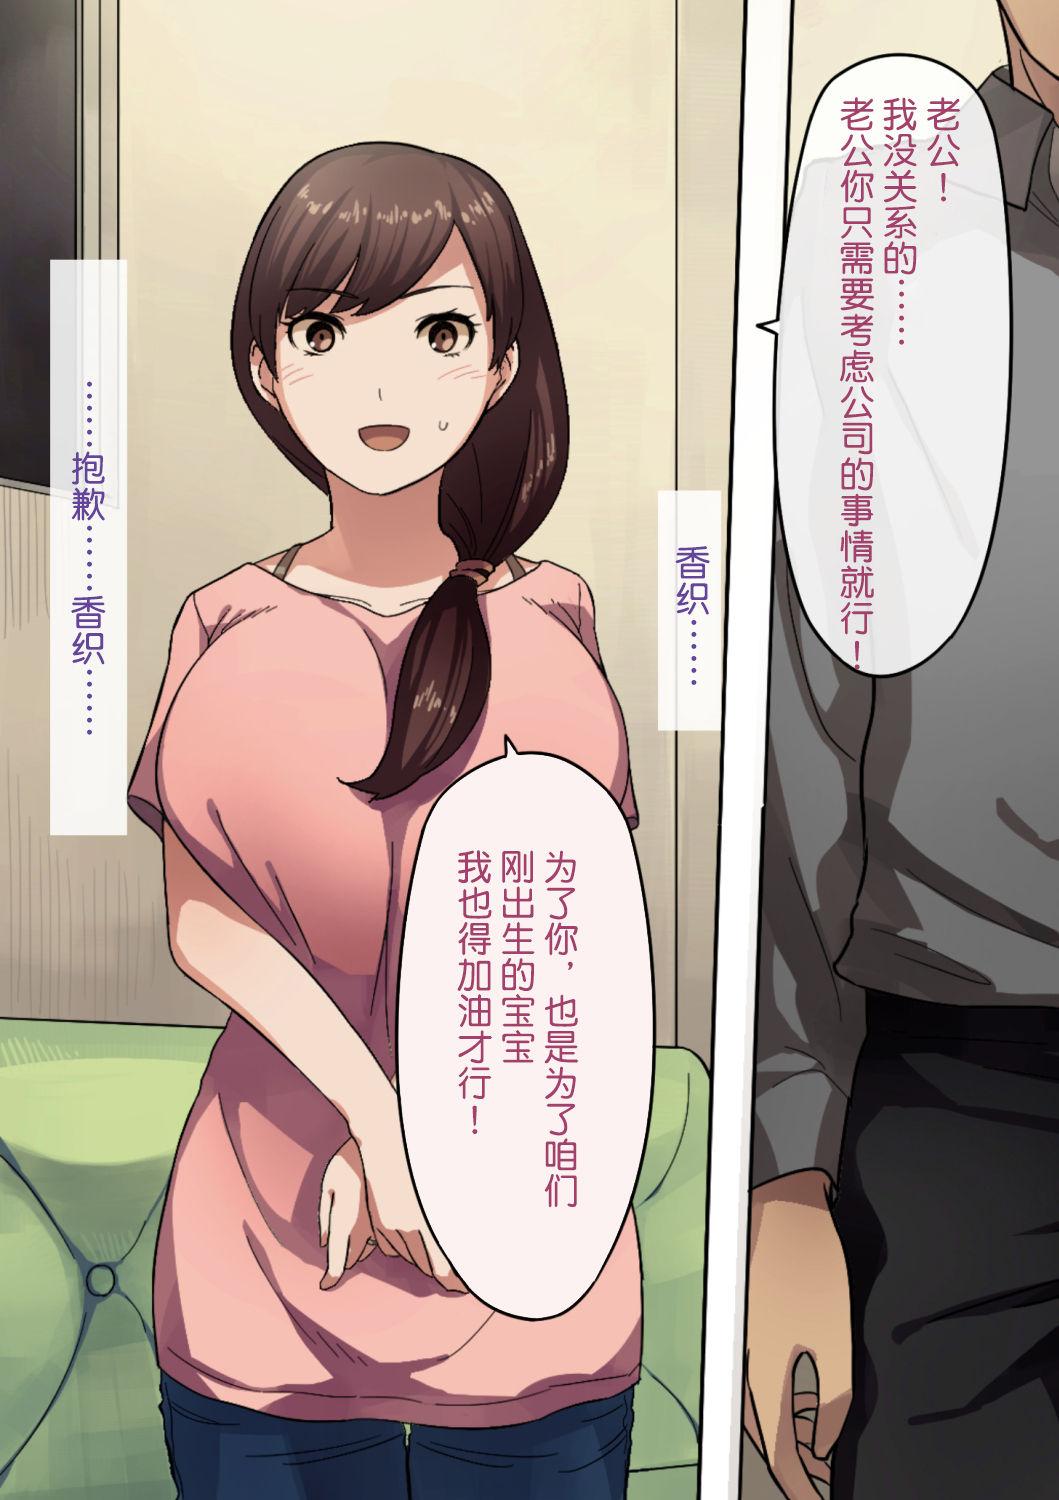 Girl On Girl [NT Labo] Aisai, Doui no Ue, Netorare | Beloved Wife - Netorare After Consent[Chinese]【不可视汉化】 Mamando - Page 5